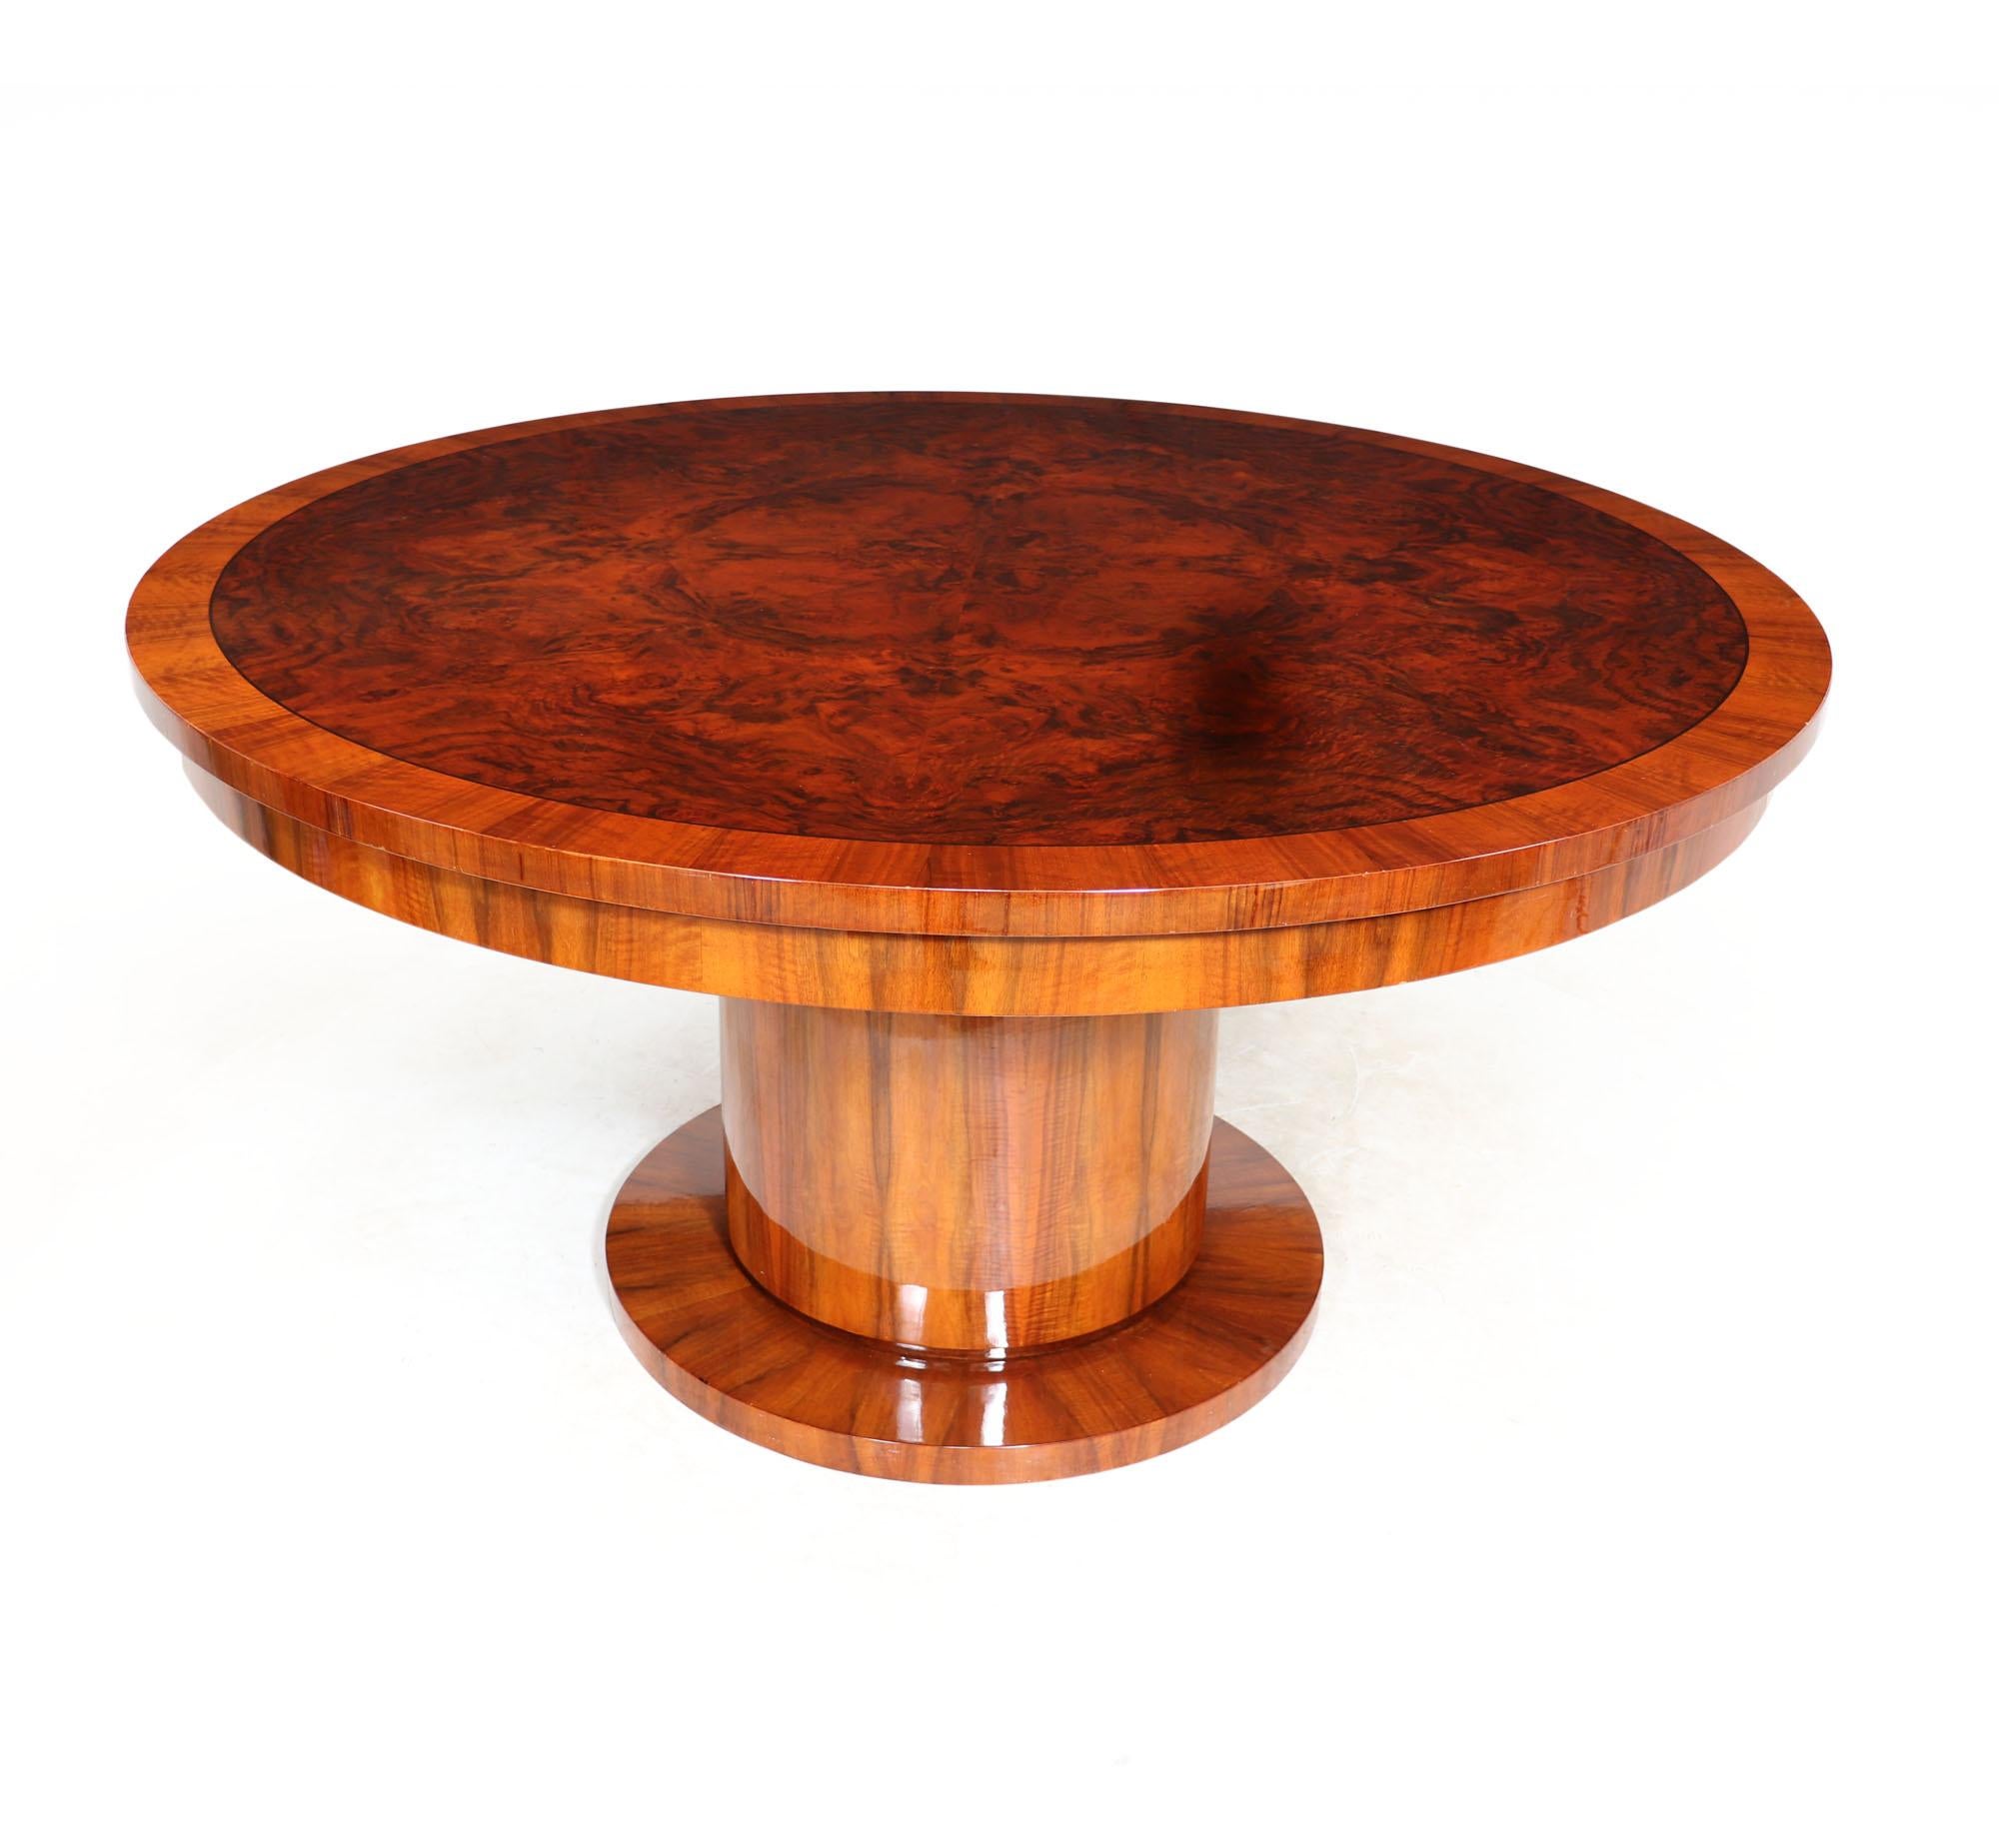 ART DECO ROUND DINING TABLE 
A large Art Deco dining table produced in burr walnut and figured walnut, having a circular top that could seat up to 8 people and standing on a central column pedestal base the table is in very good condition from its